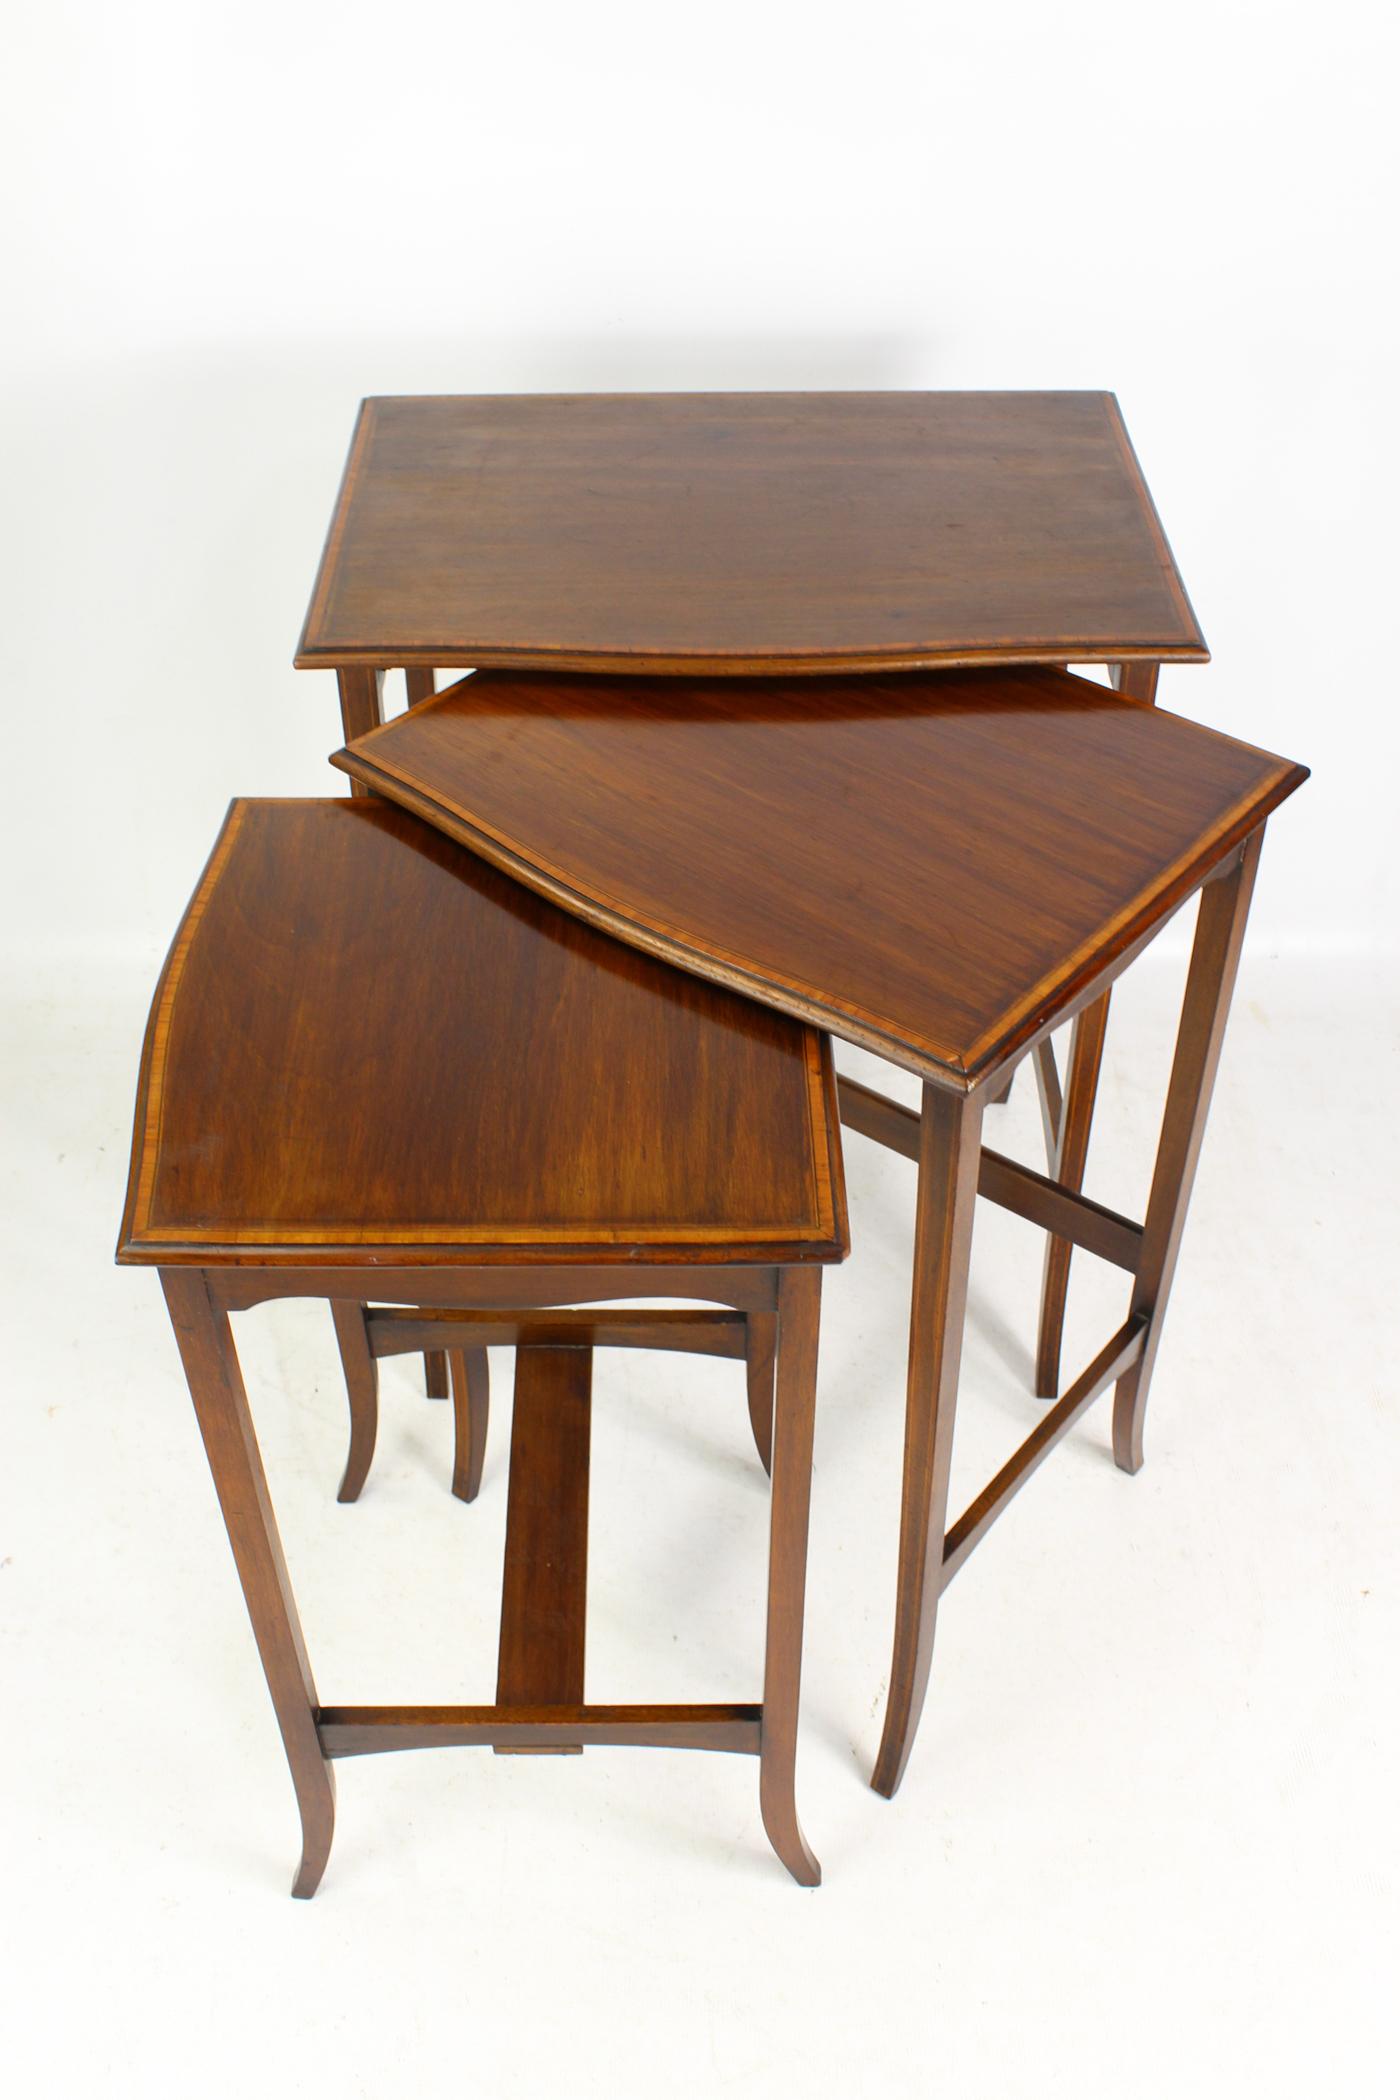 Antique Edwardian Mahogany Nest of Tables Nesting Coffee Tables English, 1910 For Sale 2